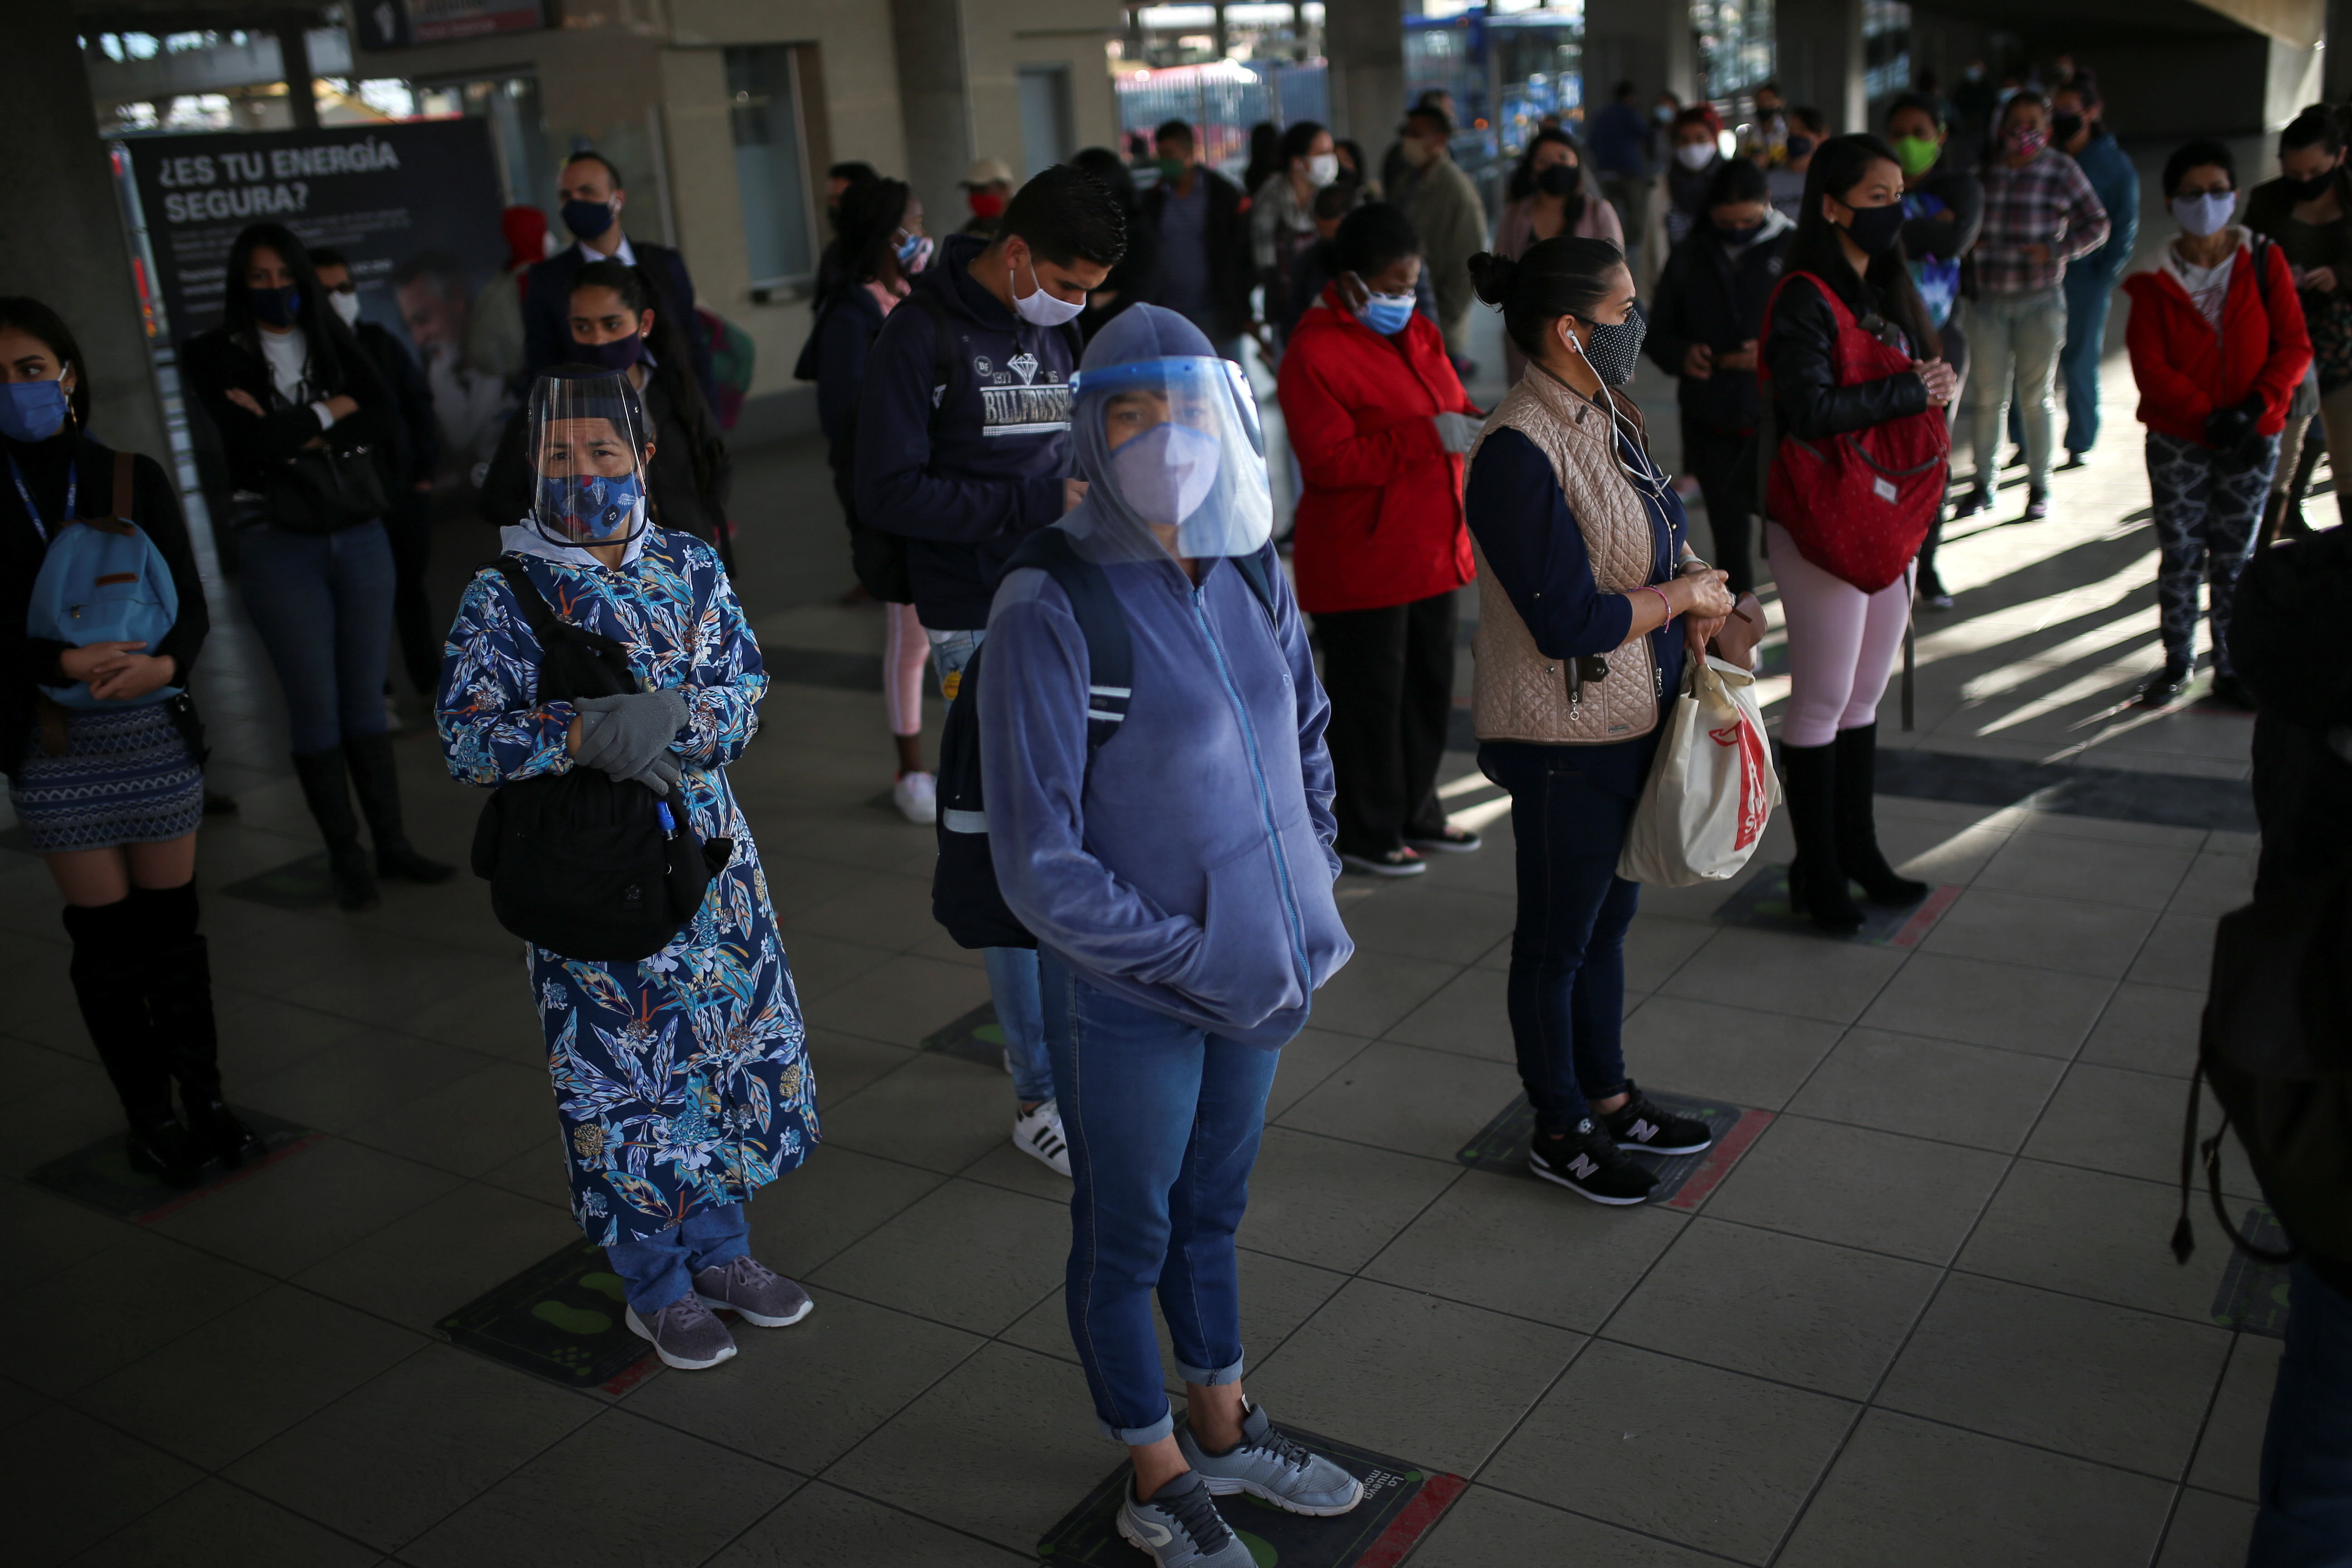 People wearing protective masks due to the ongoing coronavirus disease (COVID-19) outbreak, keep social distance as they wait for a bus inside a station of the TransMilenio public transport system after the mayor's office ended the quarantine in Bogota, Colombia August 27, 2020. REUTERS/Luisa Gonzalez